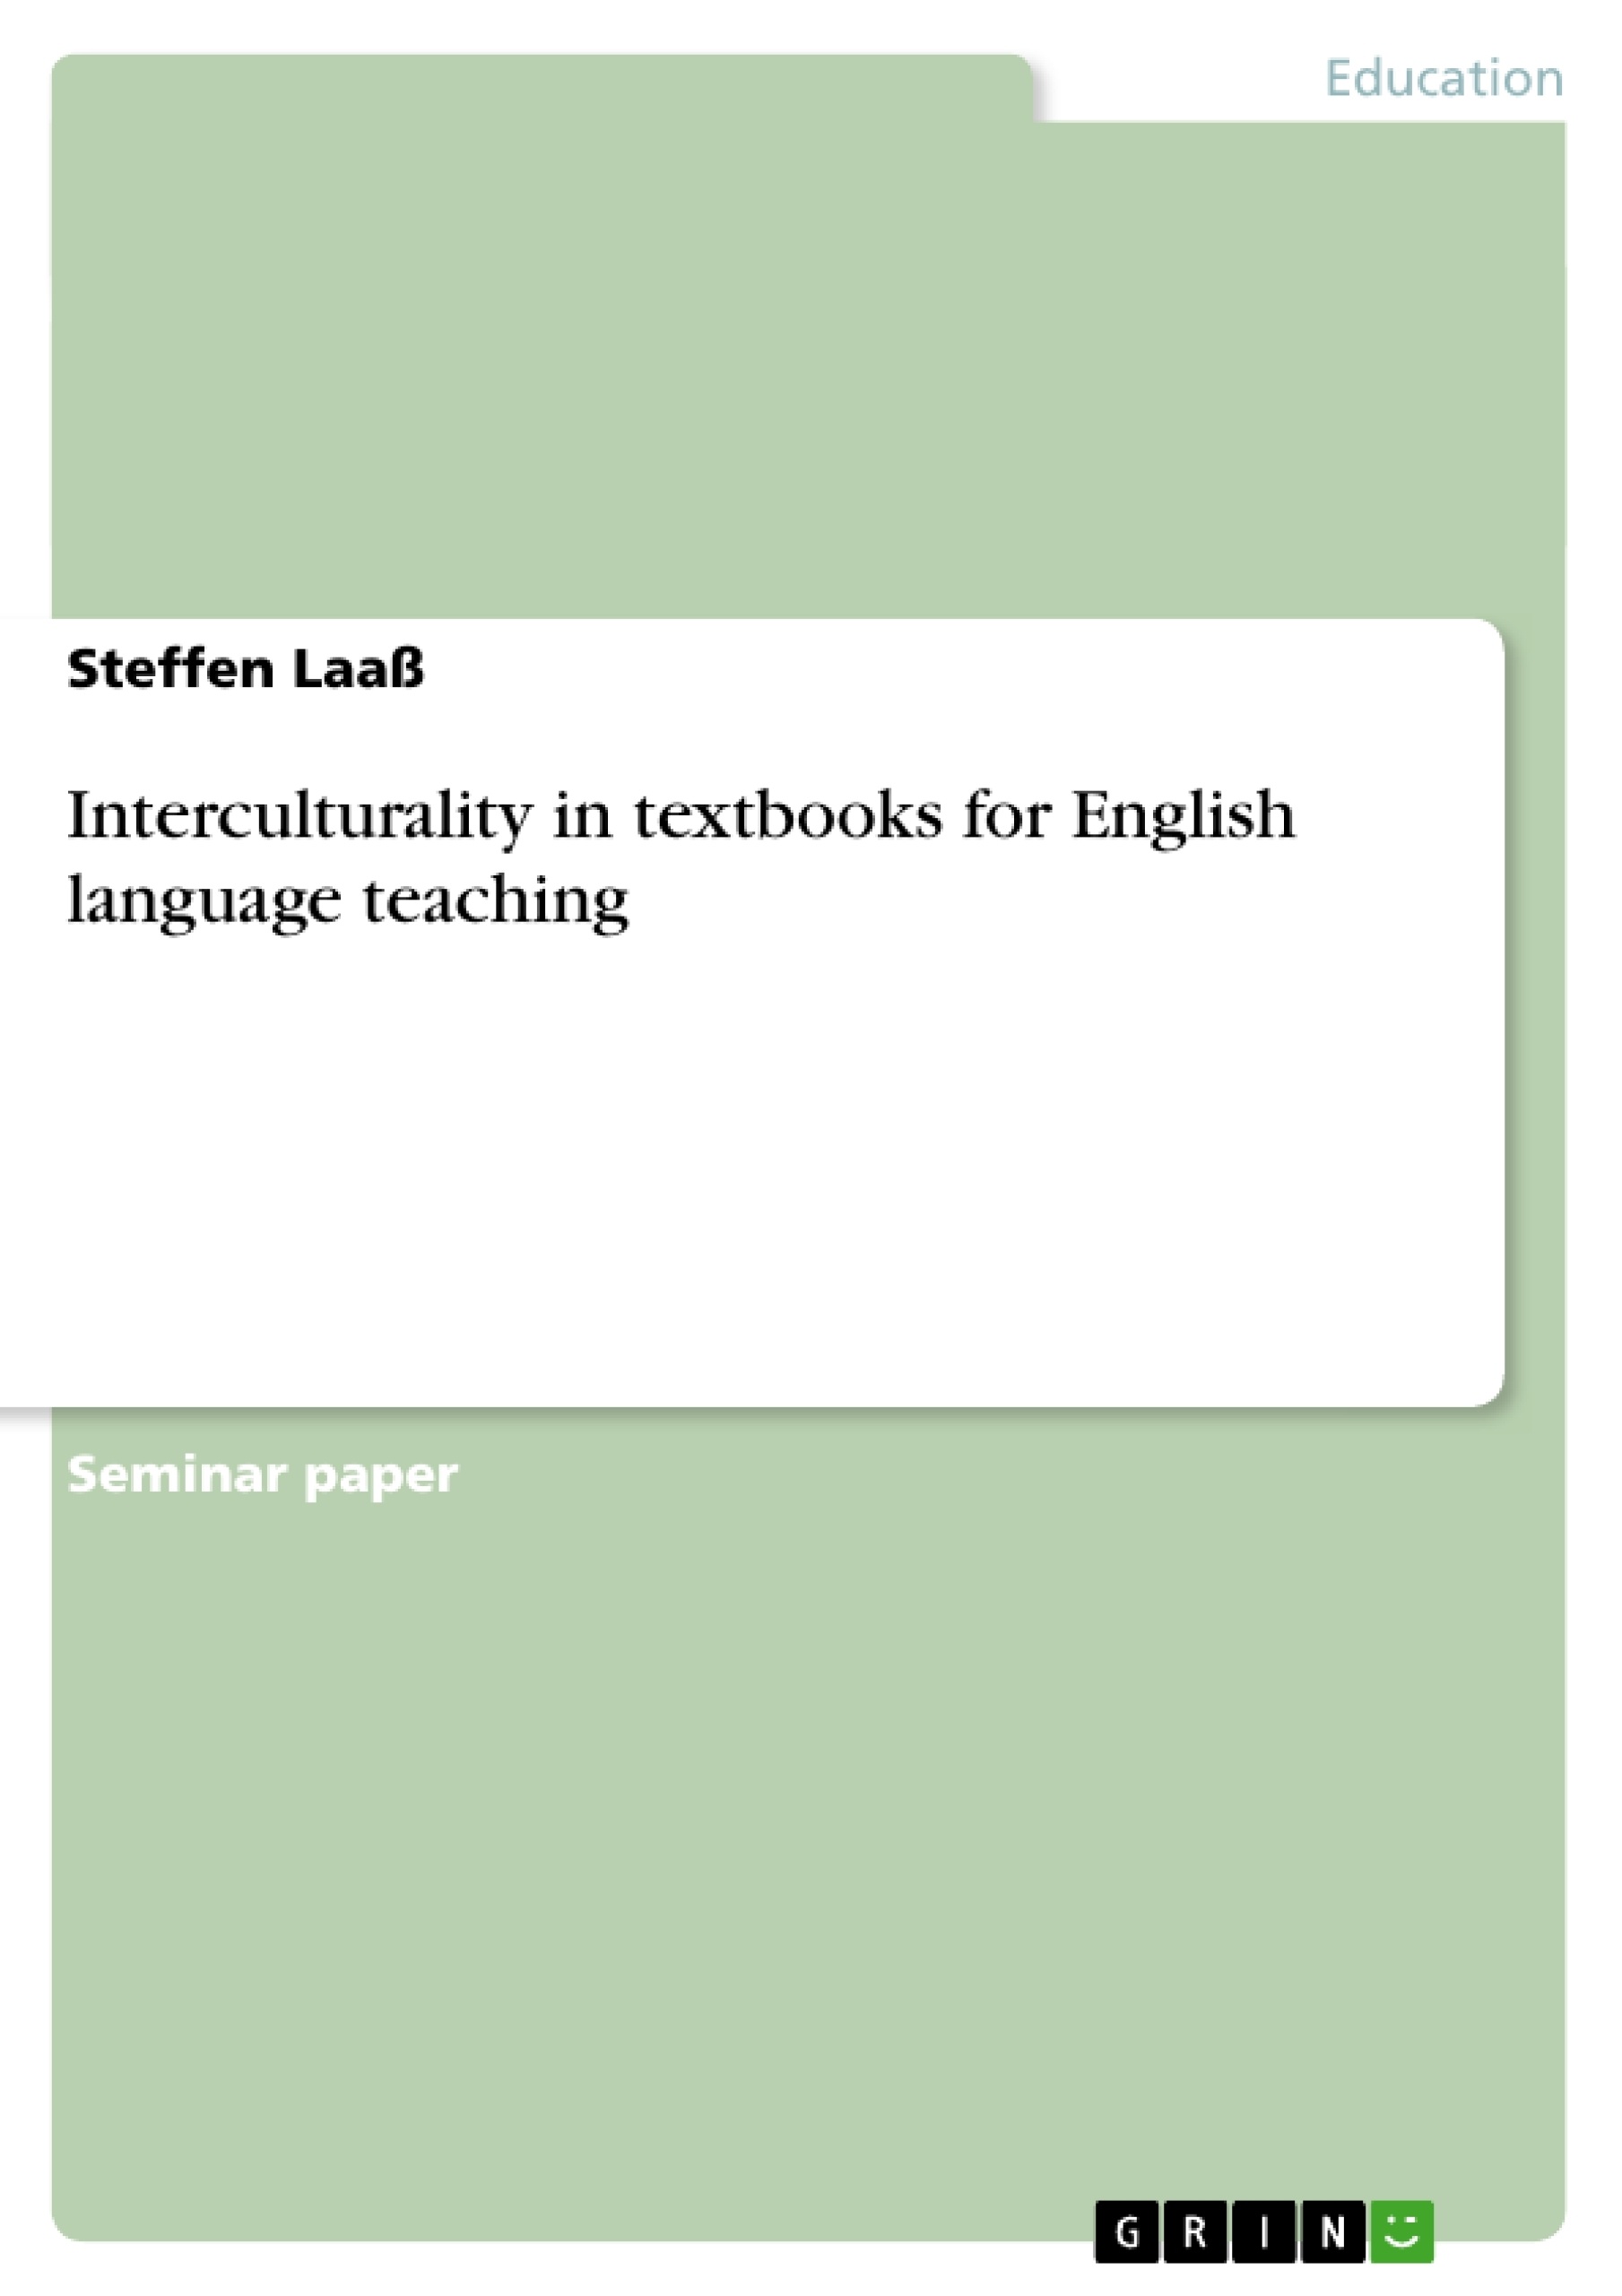 Título: Interculturality in textbooks for English language teaching